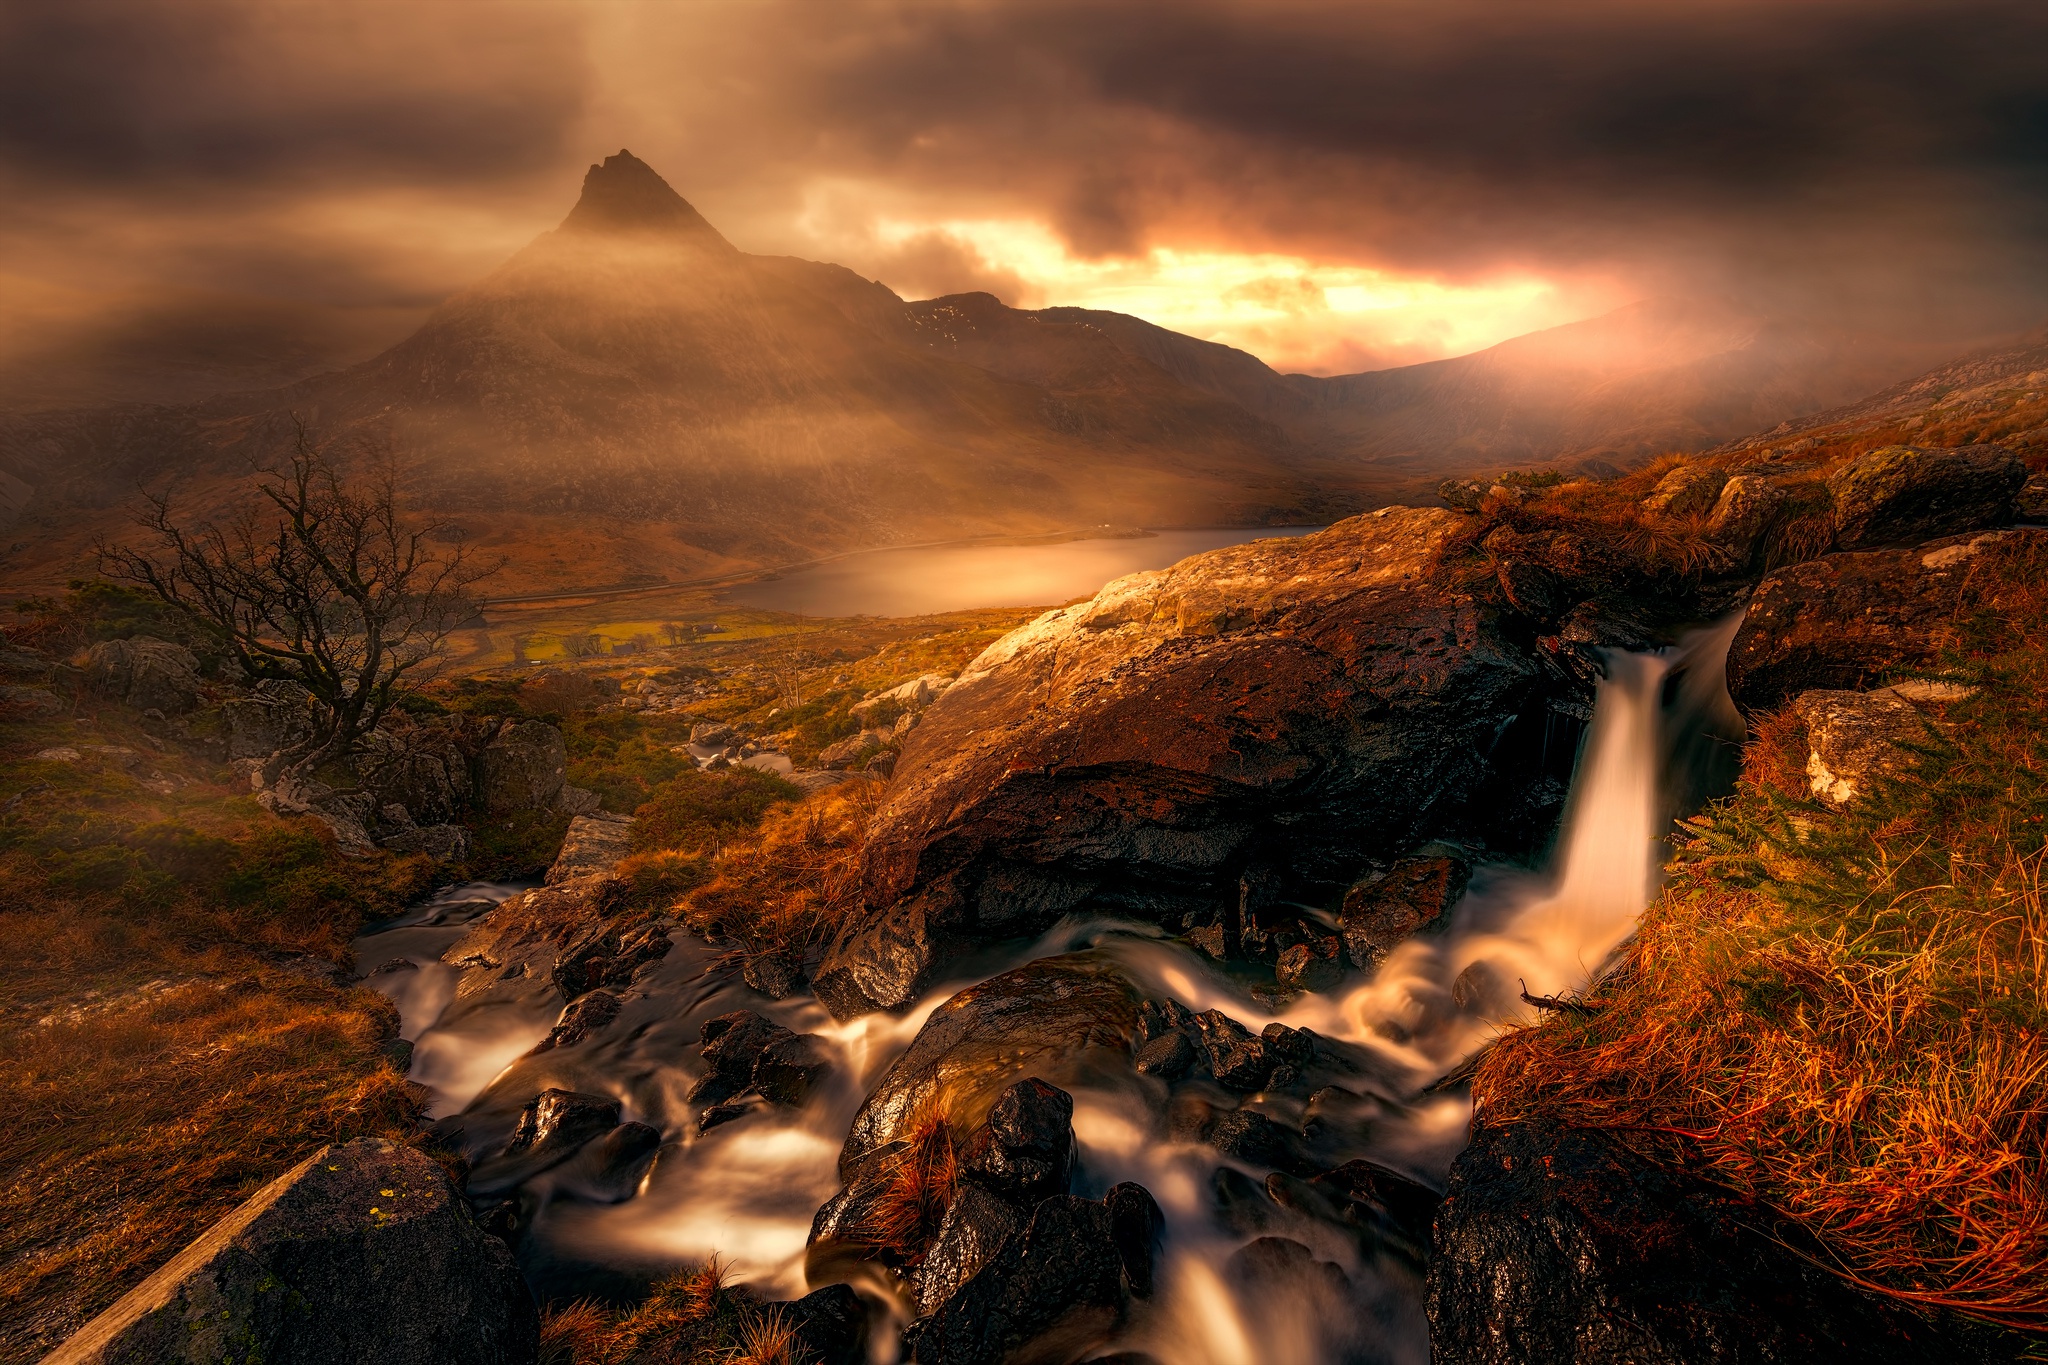 General 2048x1365 nature water mountains sky landscape low light